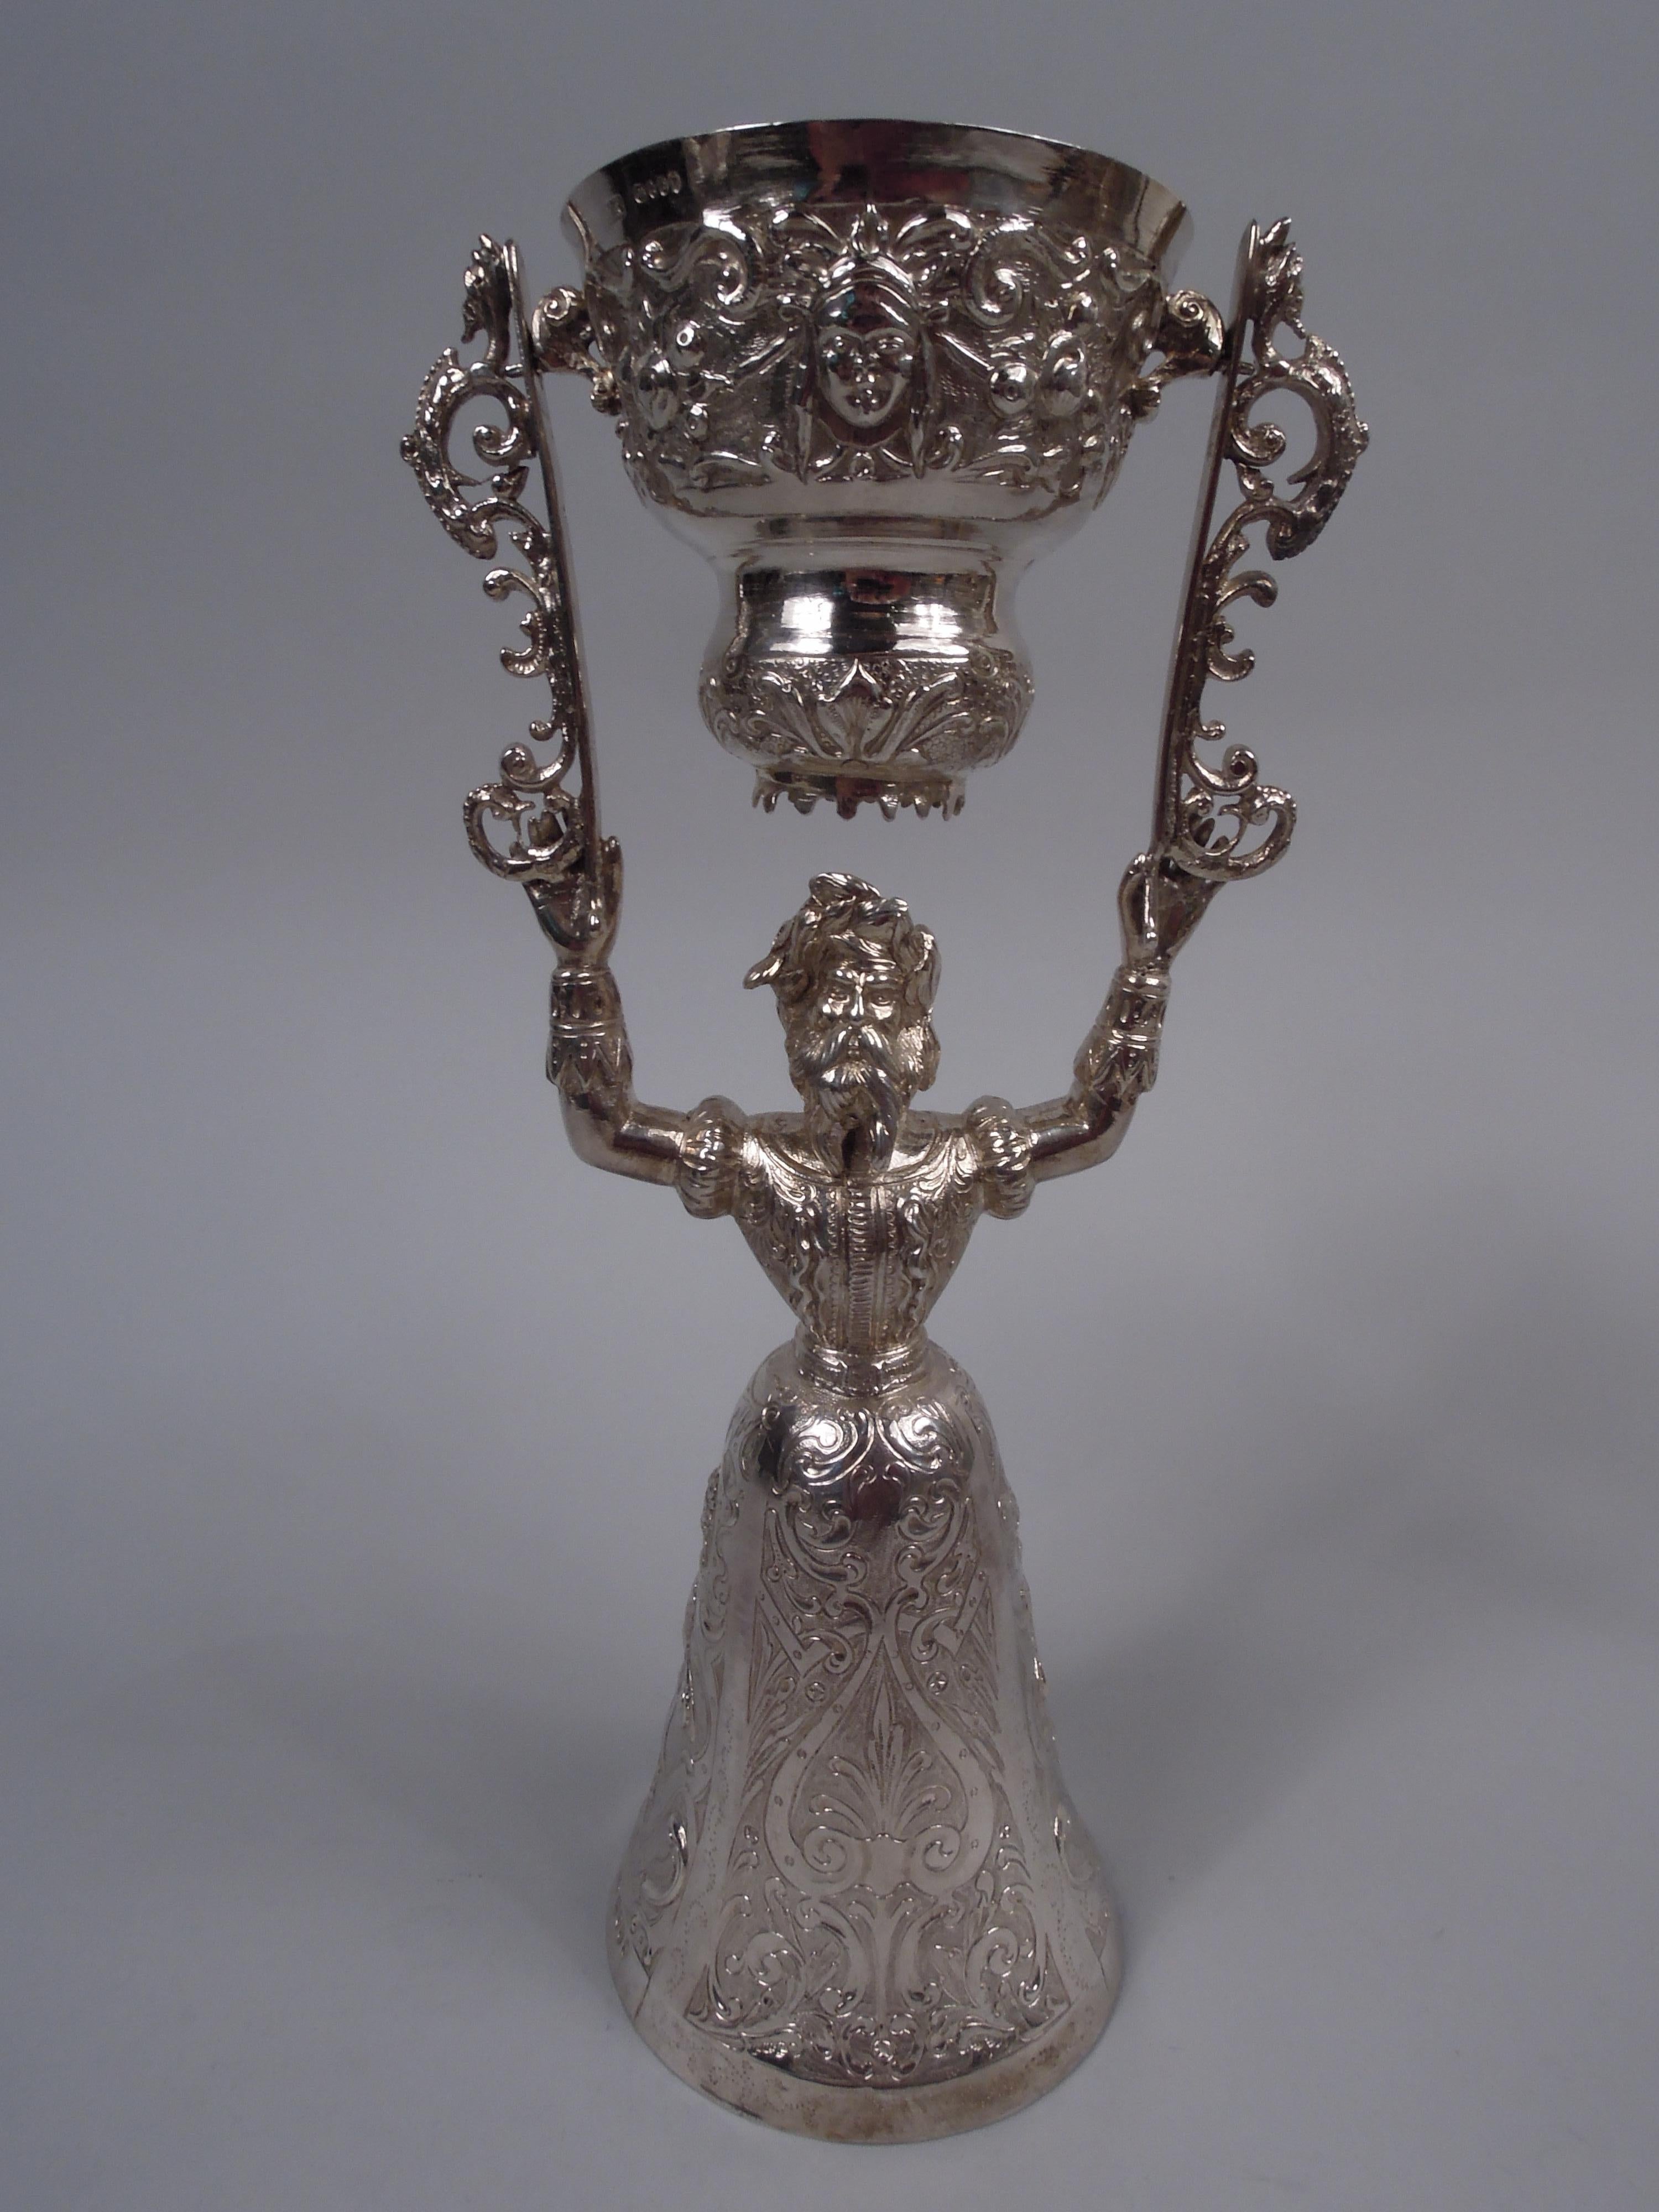 Pair of German silver wedding cups. Imported to England by Martin Sugar in 1891. Each: Snug-fitting bodice and raised arms holding aloft scrolled brackets with swing-mounted double-domed bowl. Larger bowl in form of skirt. Chased and engraved